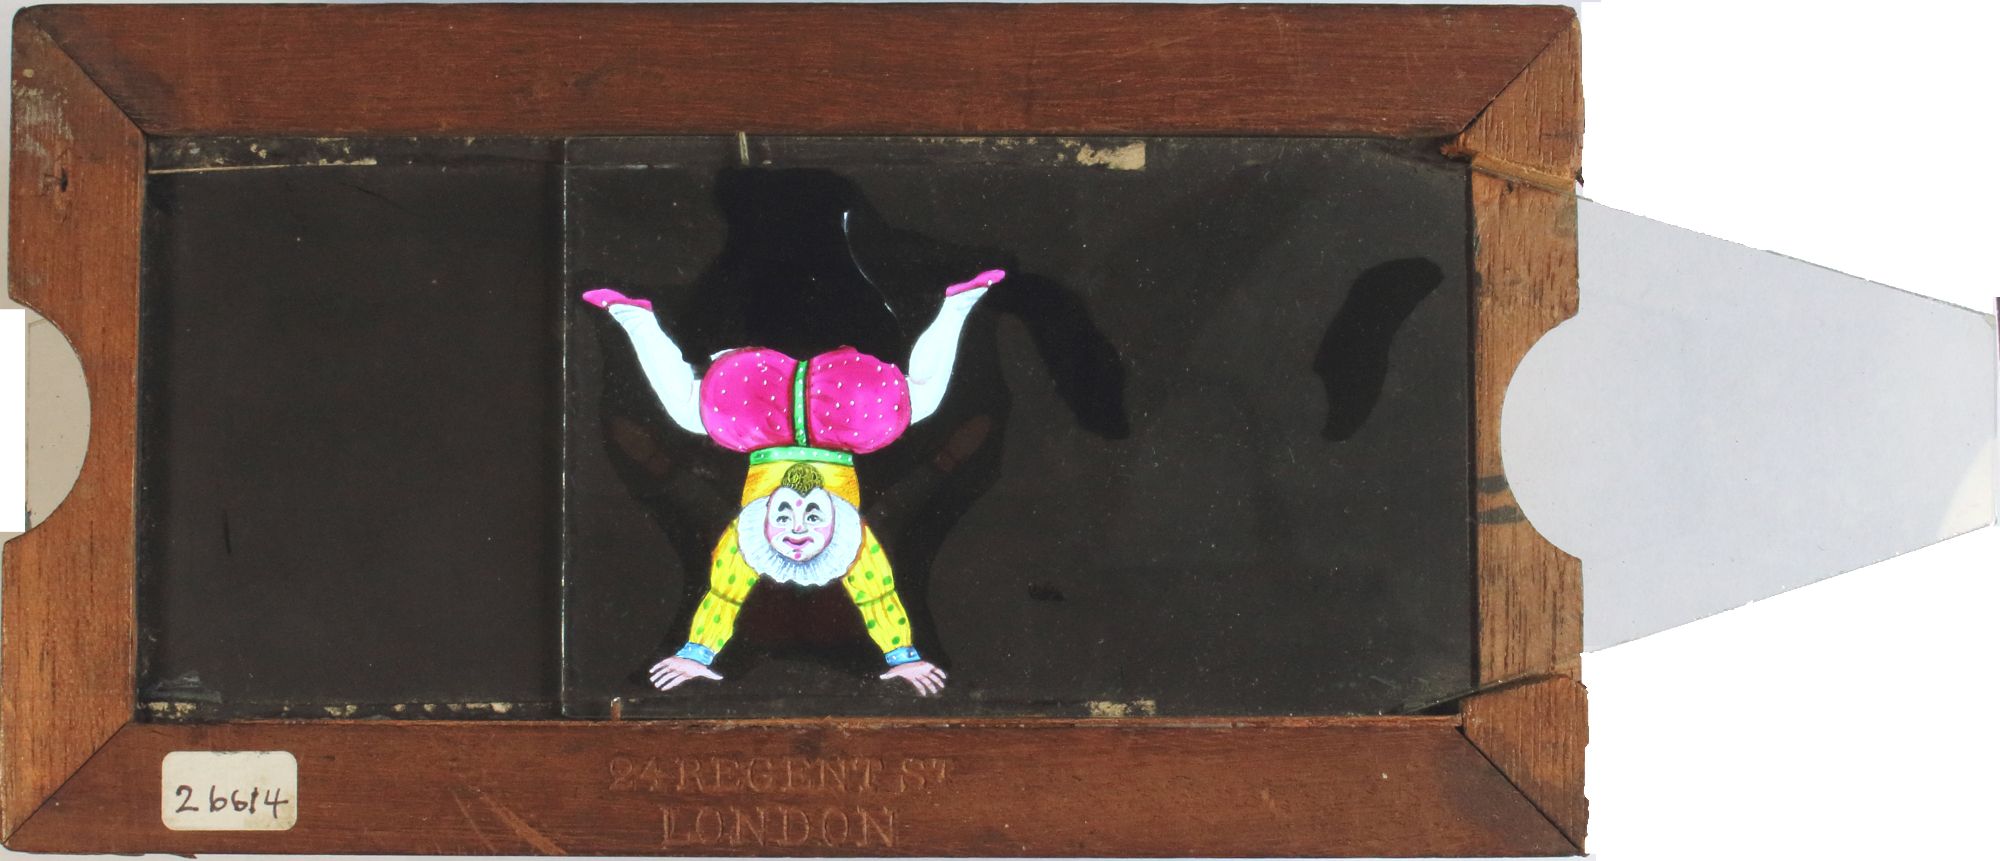 'Tumbling Clown' [legs move to three different positions] (6 7/8 x 3 5/8 x 3/8 inches), double slip - Image 2 of 2